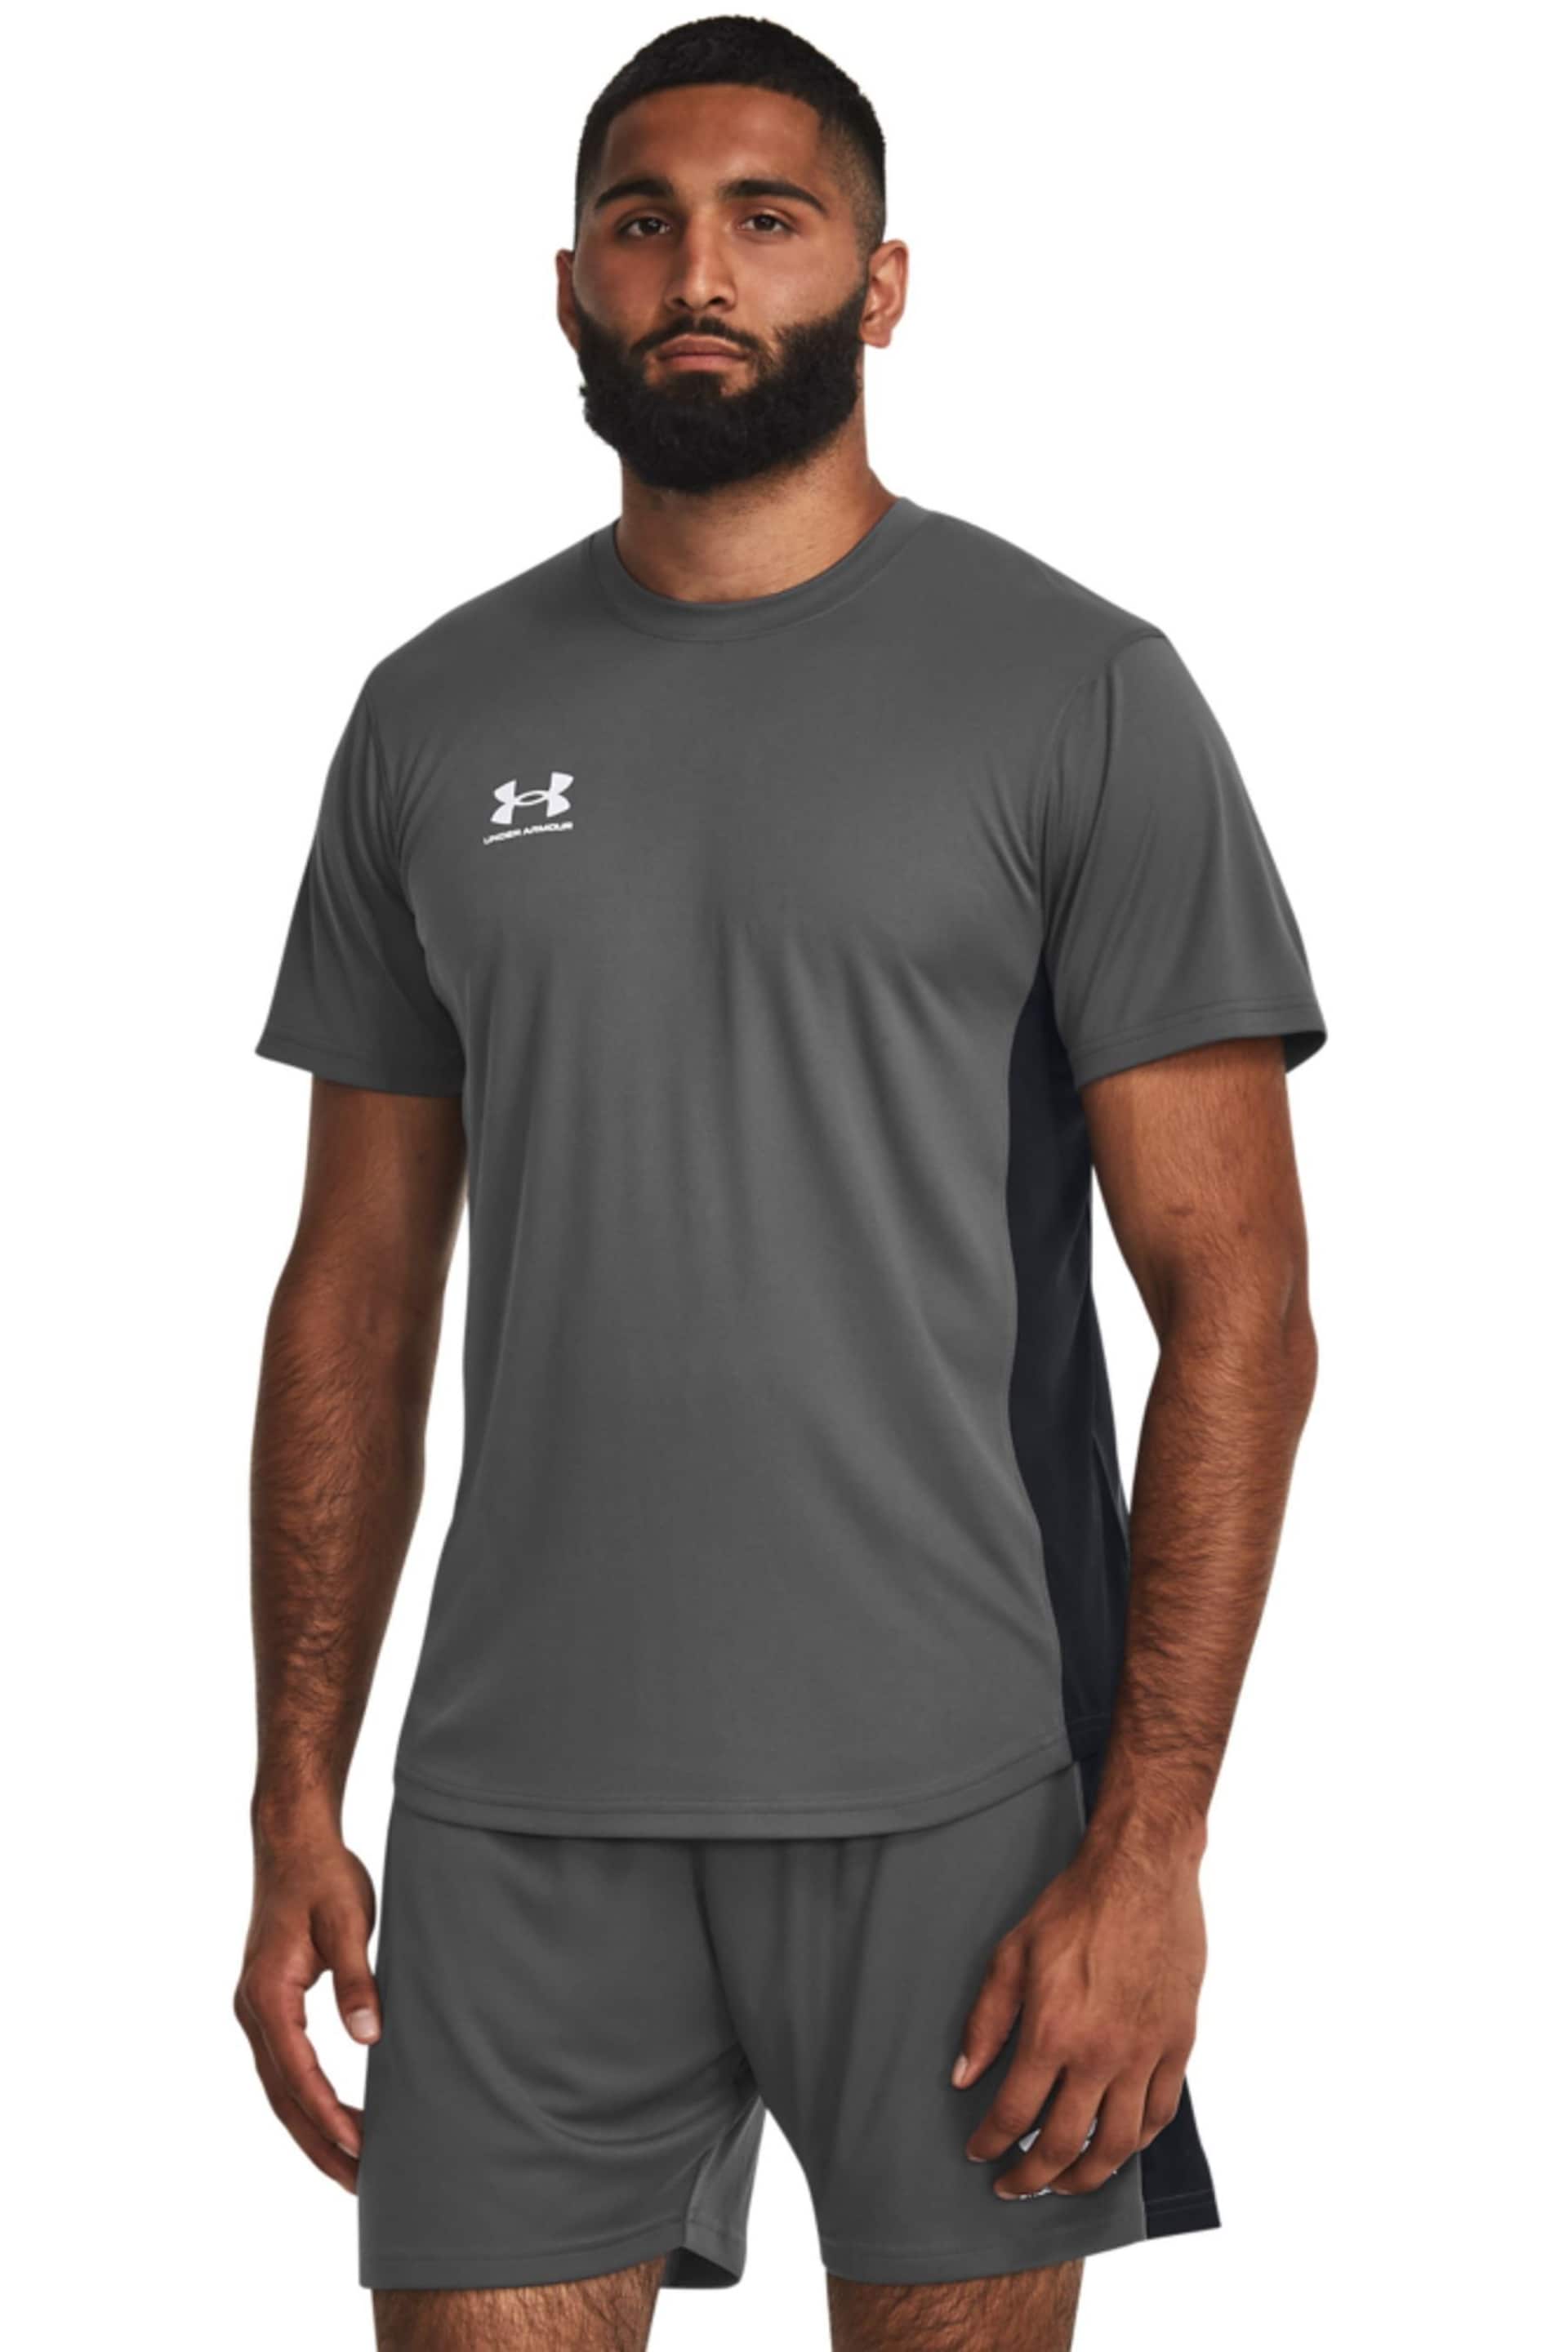 Under Armour Grey Challenger Train Short Sleeve T-Shirt - Image 1 of 6